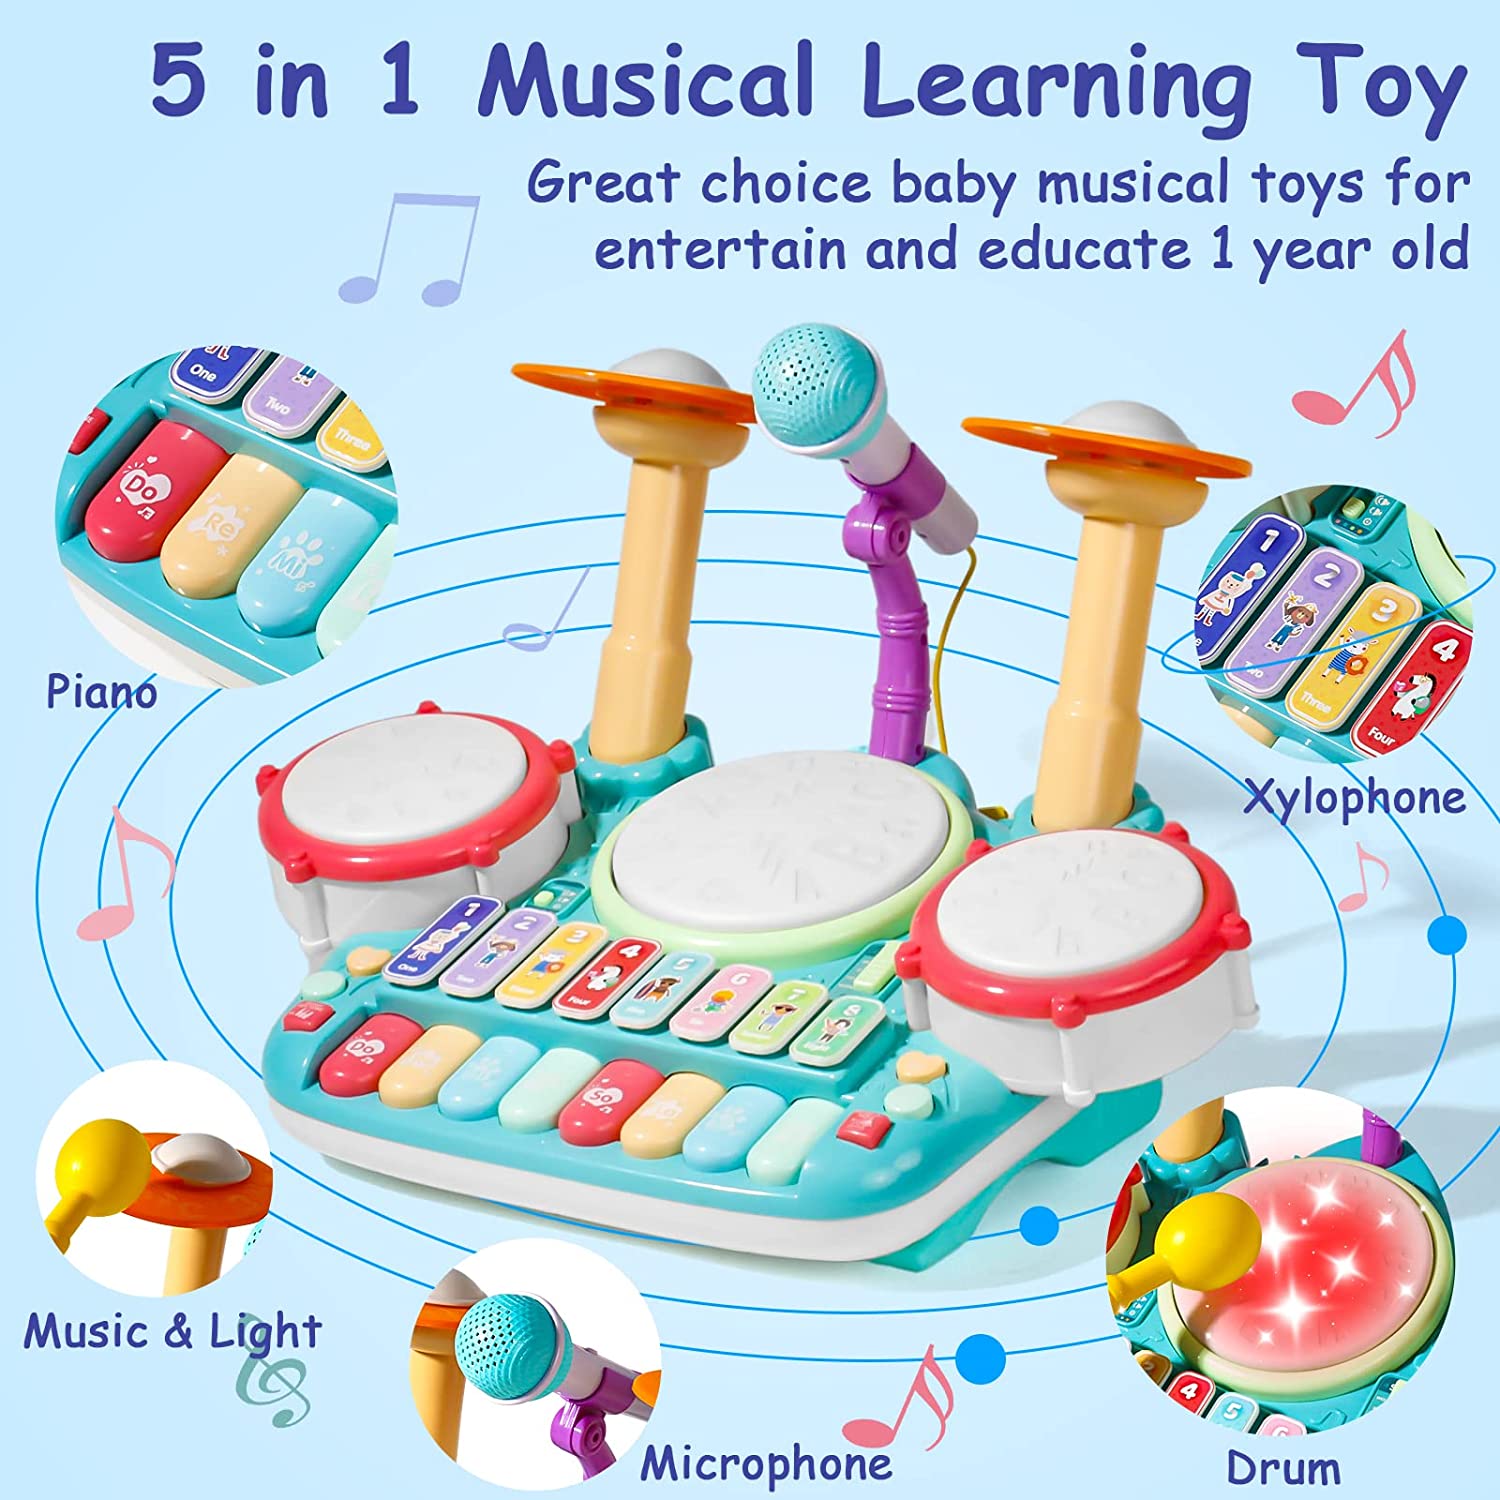 Baby Drum Set Toys for Toddlers 1-3, Kids Musical Instruments Toy for 1 Year Old Girl with Microphone Lights Piano Keyboard Early Learning Educational for 1 2 3 Year Old Girls Boys Birthday Gifts